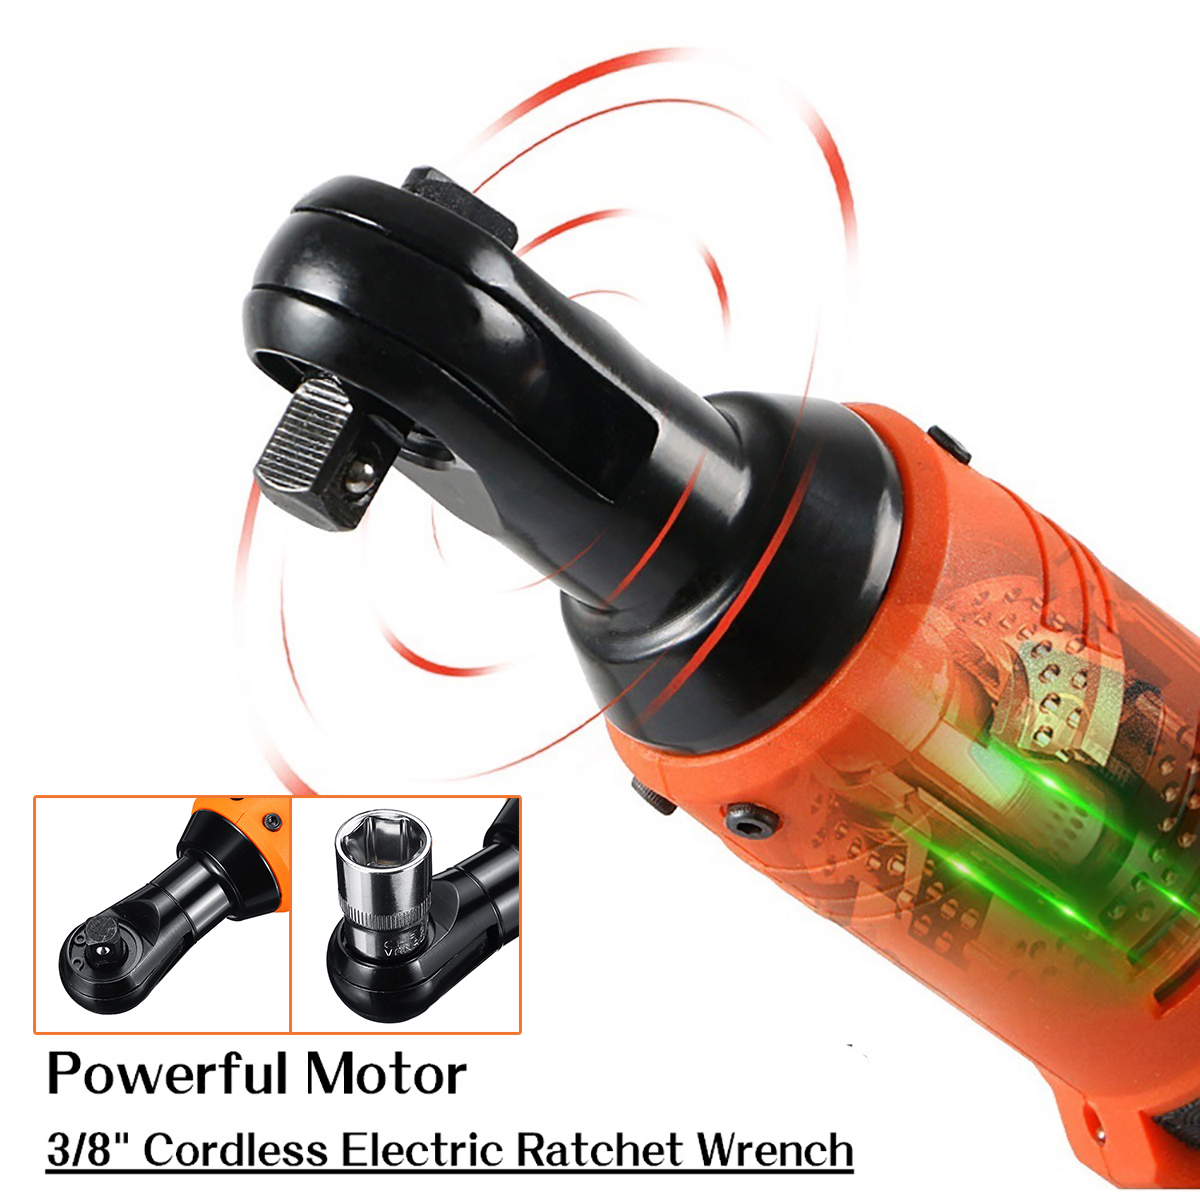 42V-90Nm-LED-Cordless-Electric-Ratchet-Wrench-38-Inch-Chuck-Right-Angle-Wrench-W-2Pcs-Battery-Kit-1552994-5